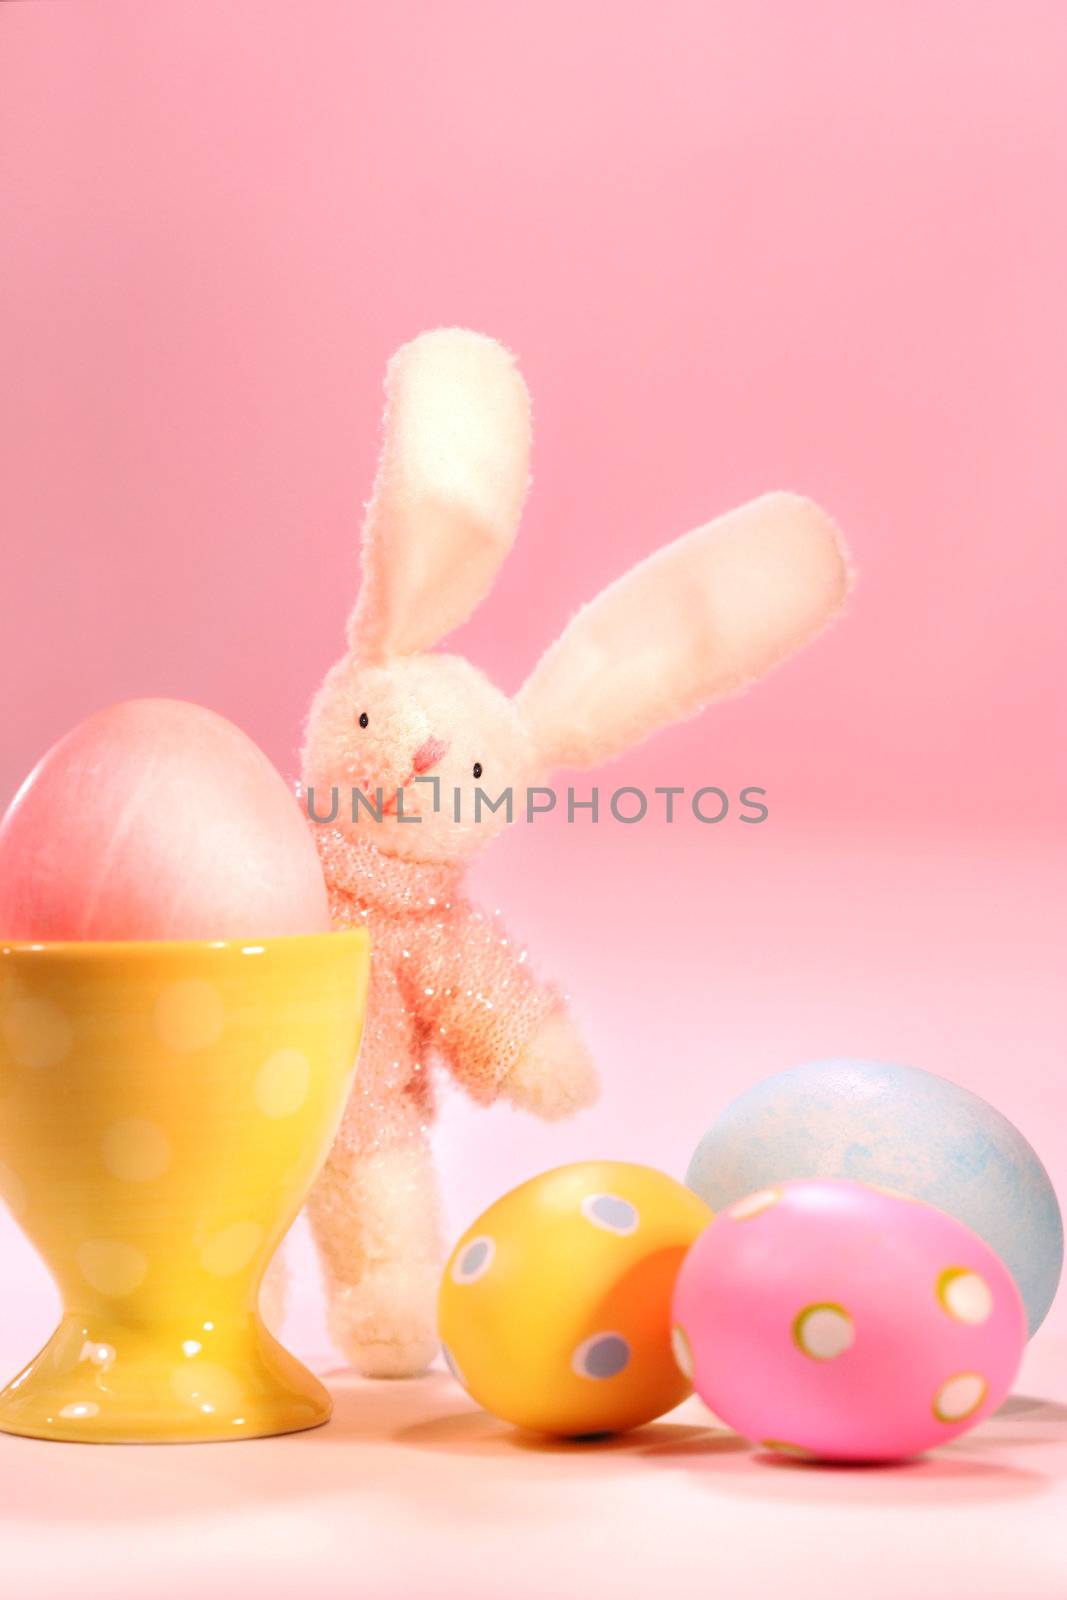 Little rabbit with a colored egg by Sandralise